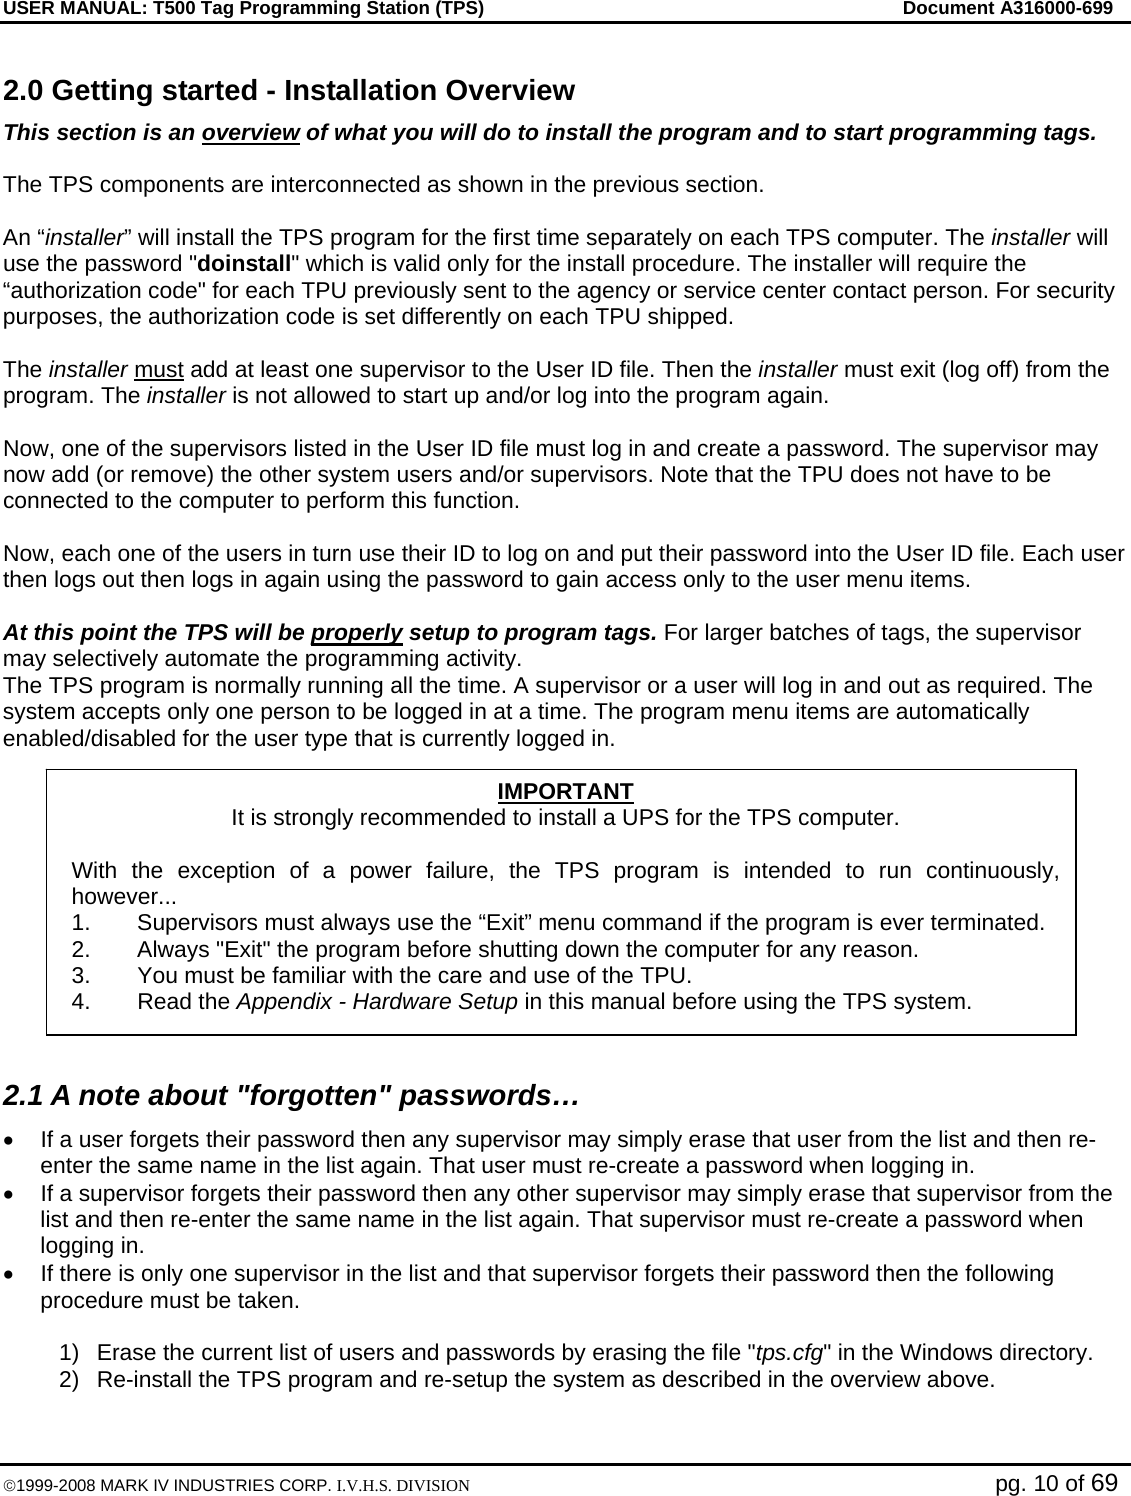 USER MANUAL: T500 Tag Programming Station (TPS)     Document A316000-699  ©1999-2008 MARK IV INDUSTRIES CORP. I.V.H.S. DIVISION   pg. 10 of 69 2.0 Getting started - Installation Overview This section is an overview of what you will do to install the program and to start programming tags.  The TPS components are interconnected as shown in the previous section.  An “installer” will install the TPS program for the first time separately on each TPS computer. The installer will use the password &quot;doinstall&quot; which is valid only for the install procedure. The installer will require the “authorization code&quot; for each TPU previously sent to the agency or service center contact person. For security purposes, the authorization code is set differently on each TPU shipped.  The installer must add at least one supervisor to the User ID file. Then the installer must exit (log off) from the program. The installer is not allowed to start up and/or log into the program again.   Now, one of the supervisors listed in the User ID file must log in and create a password. The supervisor may now add (or remove) the other system users and/or supervisors. Note that the TPU does not have to be connected to the computer to perform this function.  Now, each one of the users in turn use their ID to log on and put their password into the User ID file. Each user then logs out then logs in again using the password to gain access only to the user menu items.  At this point the TPS will be properly setup to program tags. For larger batches of tags, the supervisor may selectively automate the programming activity.  The TPS program is normally running all the time. A supervisor or a user will log in and out as required. The system accepts only one person to be logged in at a time. The program menu items are automatically enabled/disabled for the user type that is currently logged in.  2.1 A note about &quot;forgotten&quot; passwords… •  If a user forgets their password then any supervisor may simply erase that user from the list and then re-enter the same name in the list again. That user must re-create a password when logging in.  •  If a supervisor forgets their password then any other supervisor may simply erase that supervisor from the list and then re-enter the same name in the list again. That supervisor must re-create a password when logging in. •  If there is only one supervisor in the list and that supervisor forgets their password then the following procedure must be taken.   1)  Erase the current list of users and passwords by erasing the file &quot;tps.cfg&quot; in the Windows directory. 2)  Re-install the TPS program and re-setup the system as described in the overview above. IMPORTANT It is strongly recommended to install a UPS for the TPS computer.  With the exception of a power failure, the TPS program is intended to run continuously, however... 1.  Supervisors must always use the “Exit” menu command if the program is ever terminated. 2.  Always &quot;Exit&quot; the program before shutting down the computer for any reason. 3.  You must be familiar with the care and use of the TPU.  4. Read the Appendix - Hardware Setup in this manual before using the TPS system. 